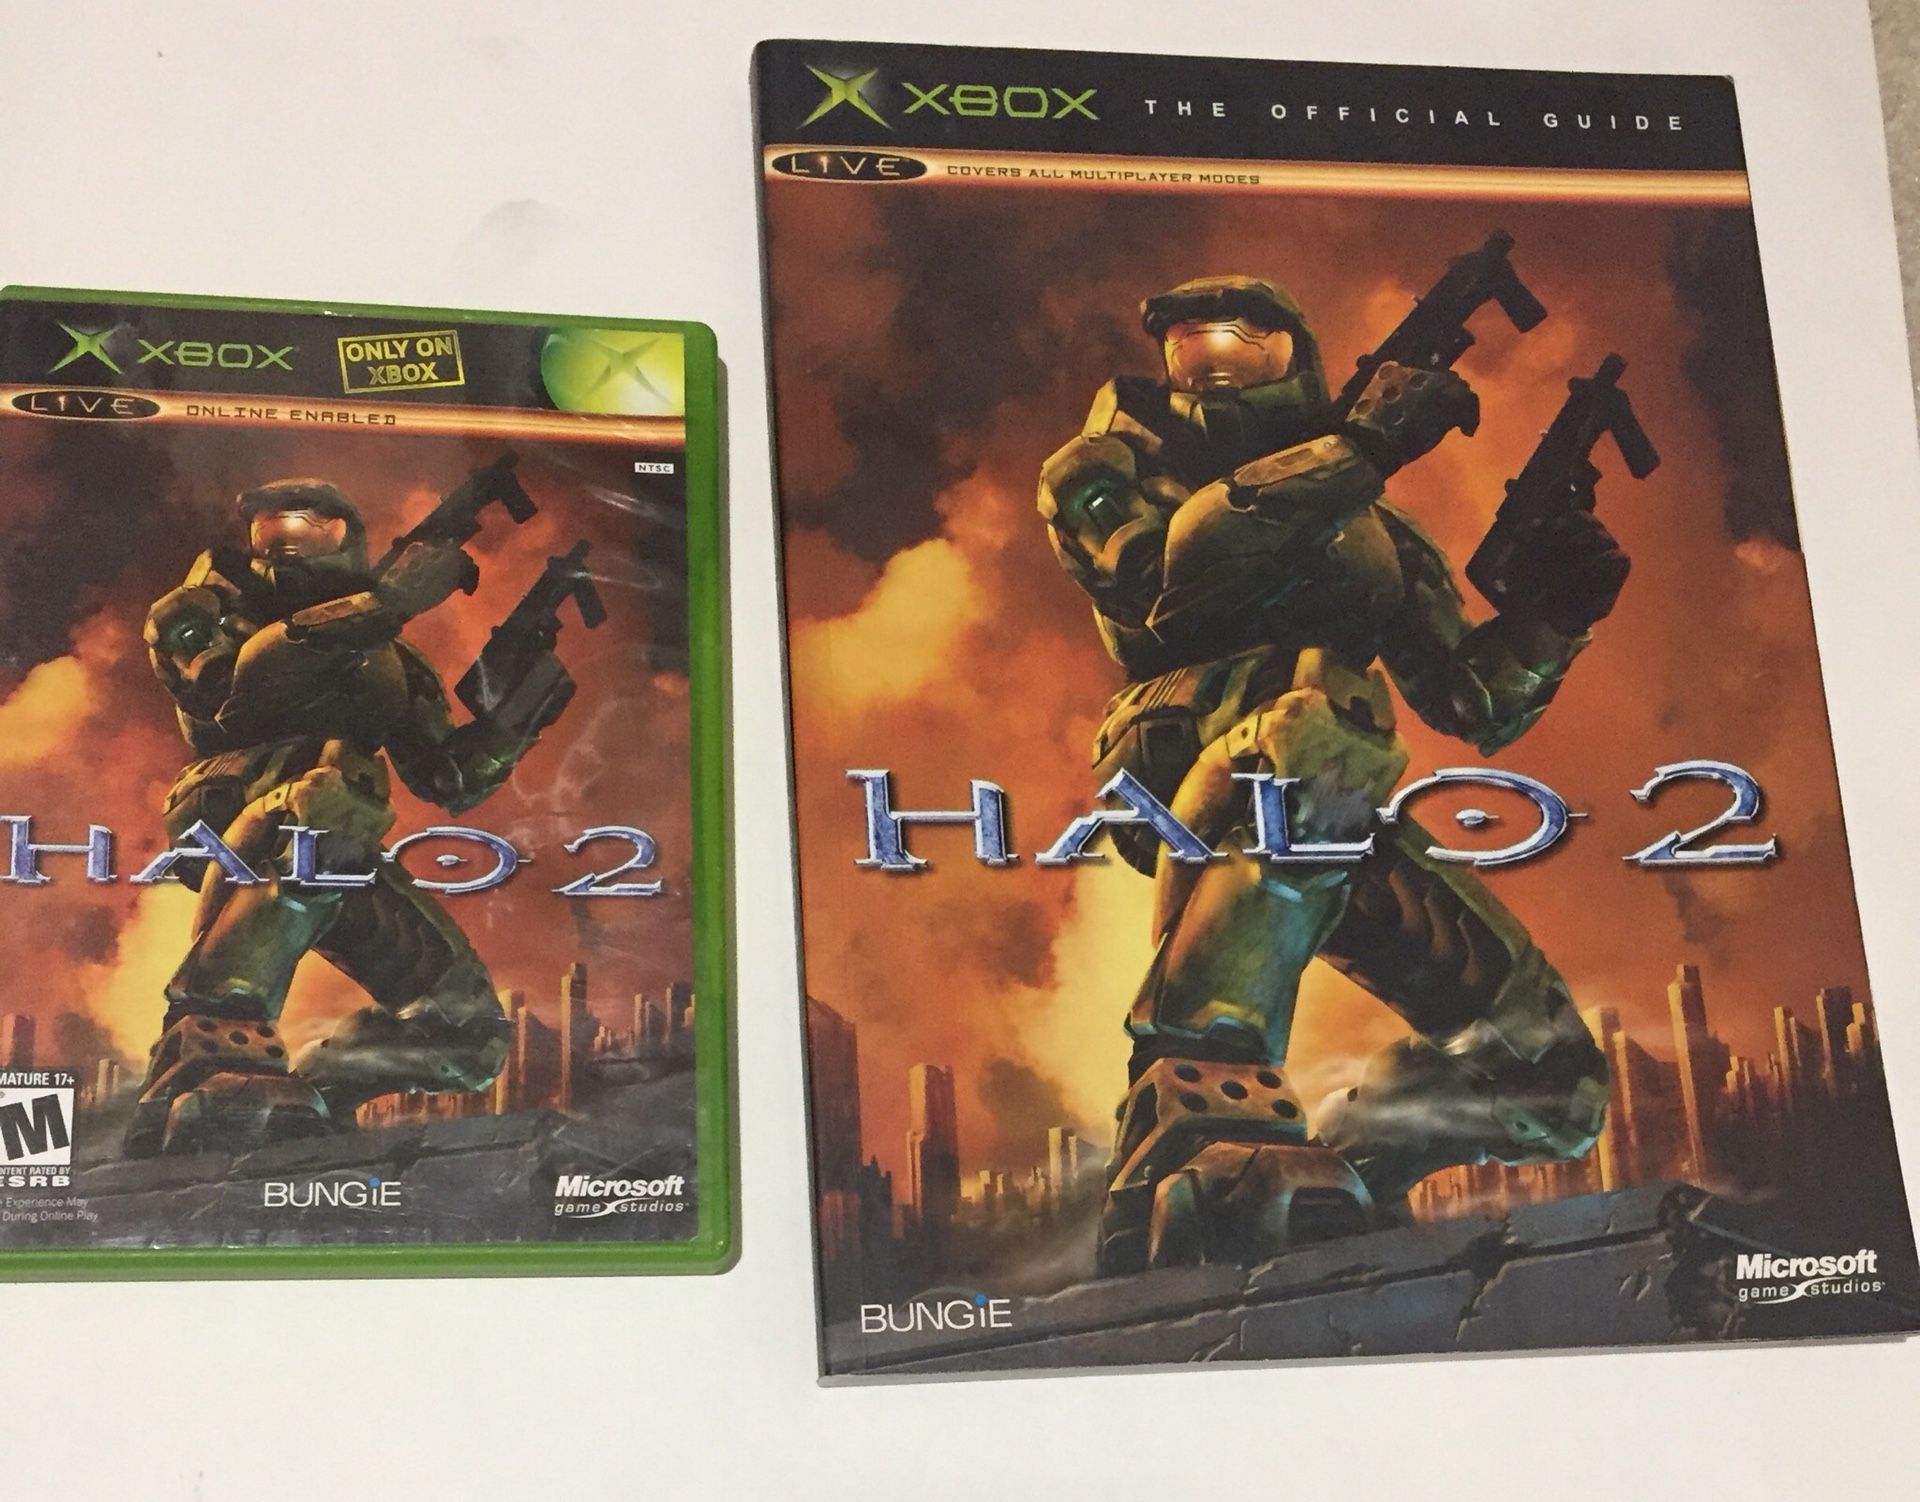 Halo 2 with guide book